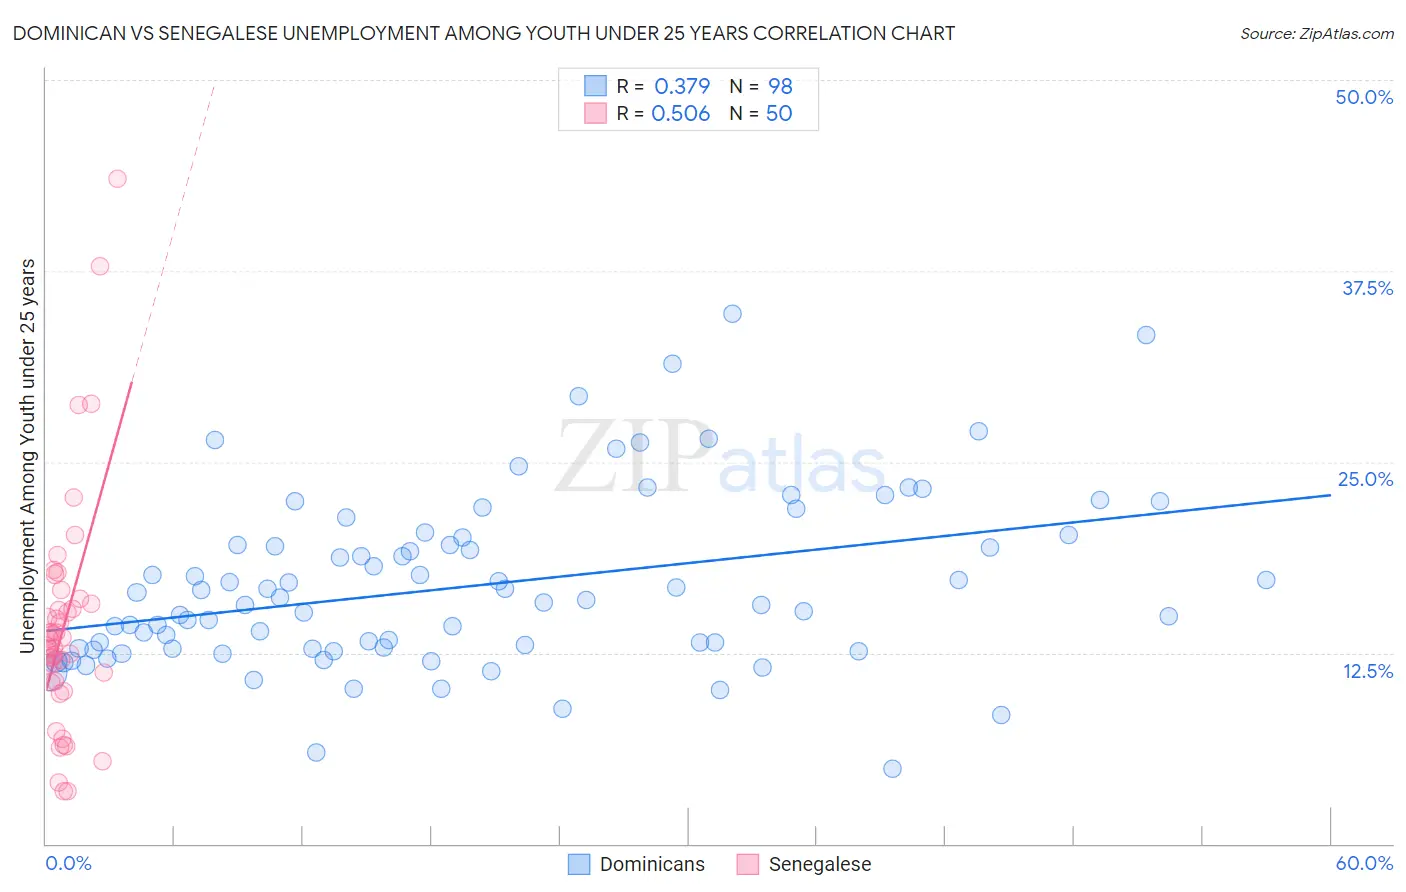 Dominican vs Senegalese Unemployment Among Youth under 25 years